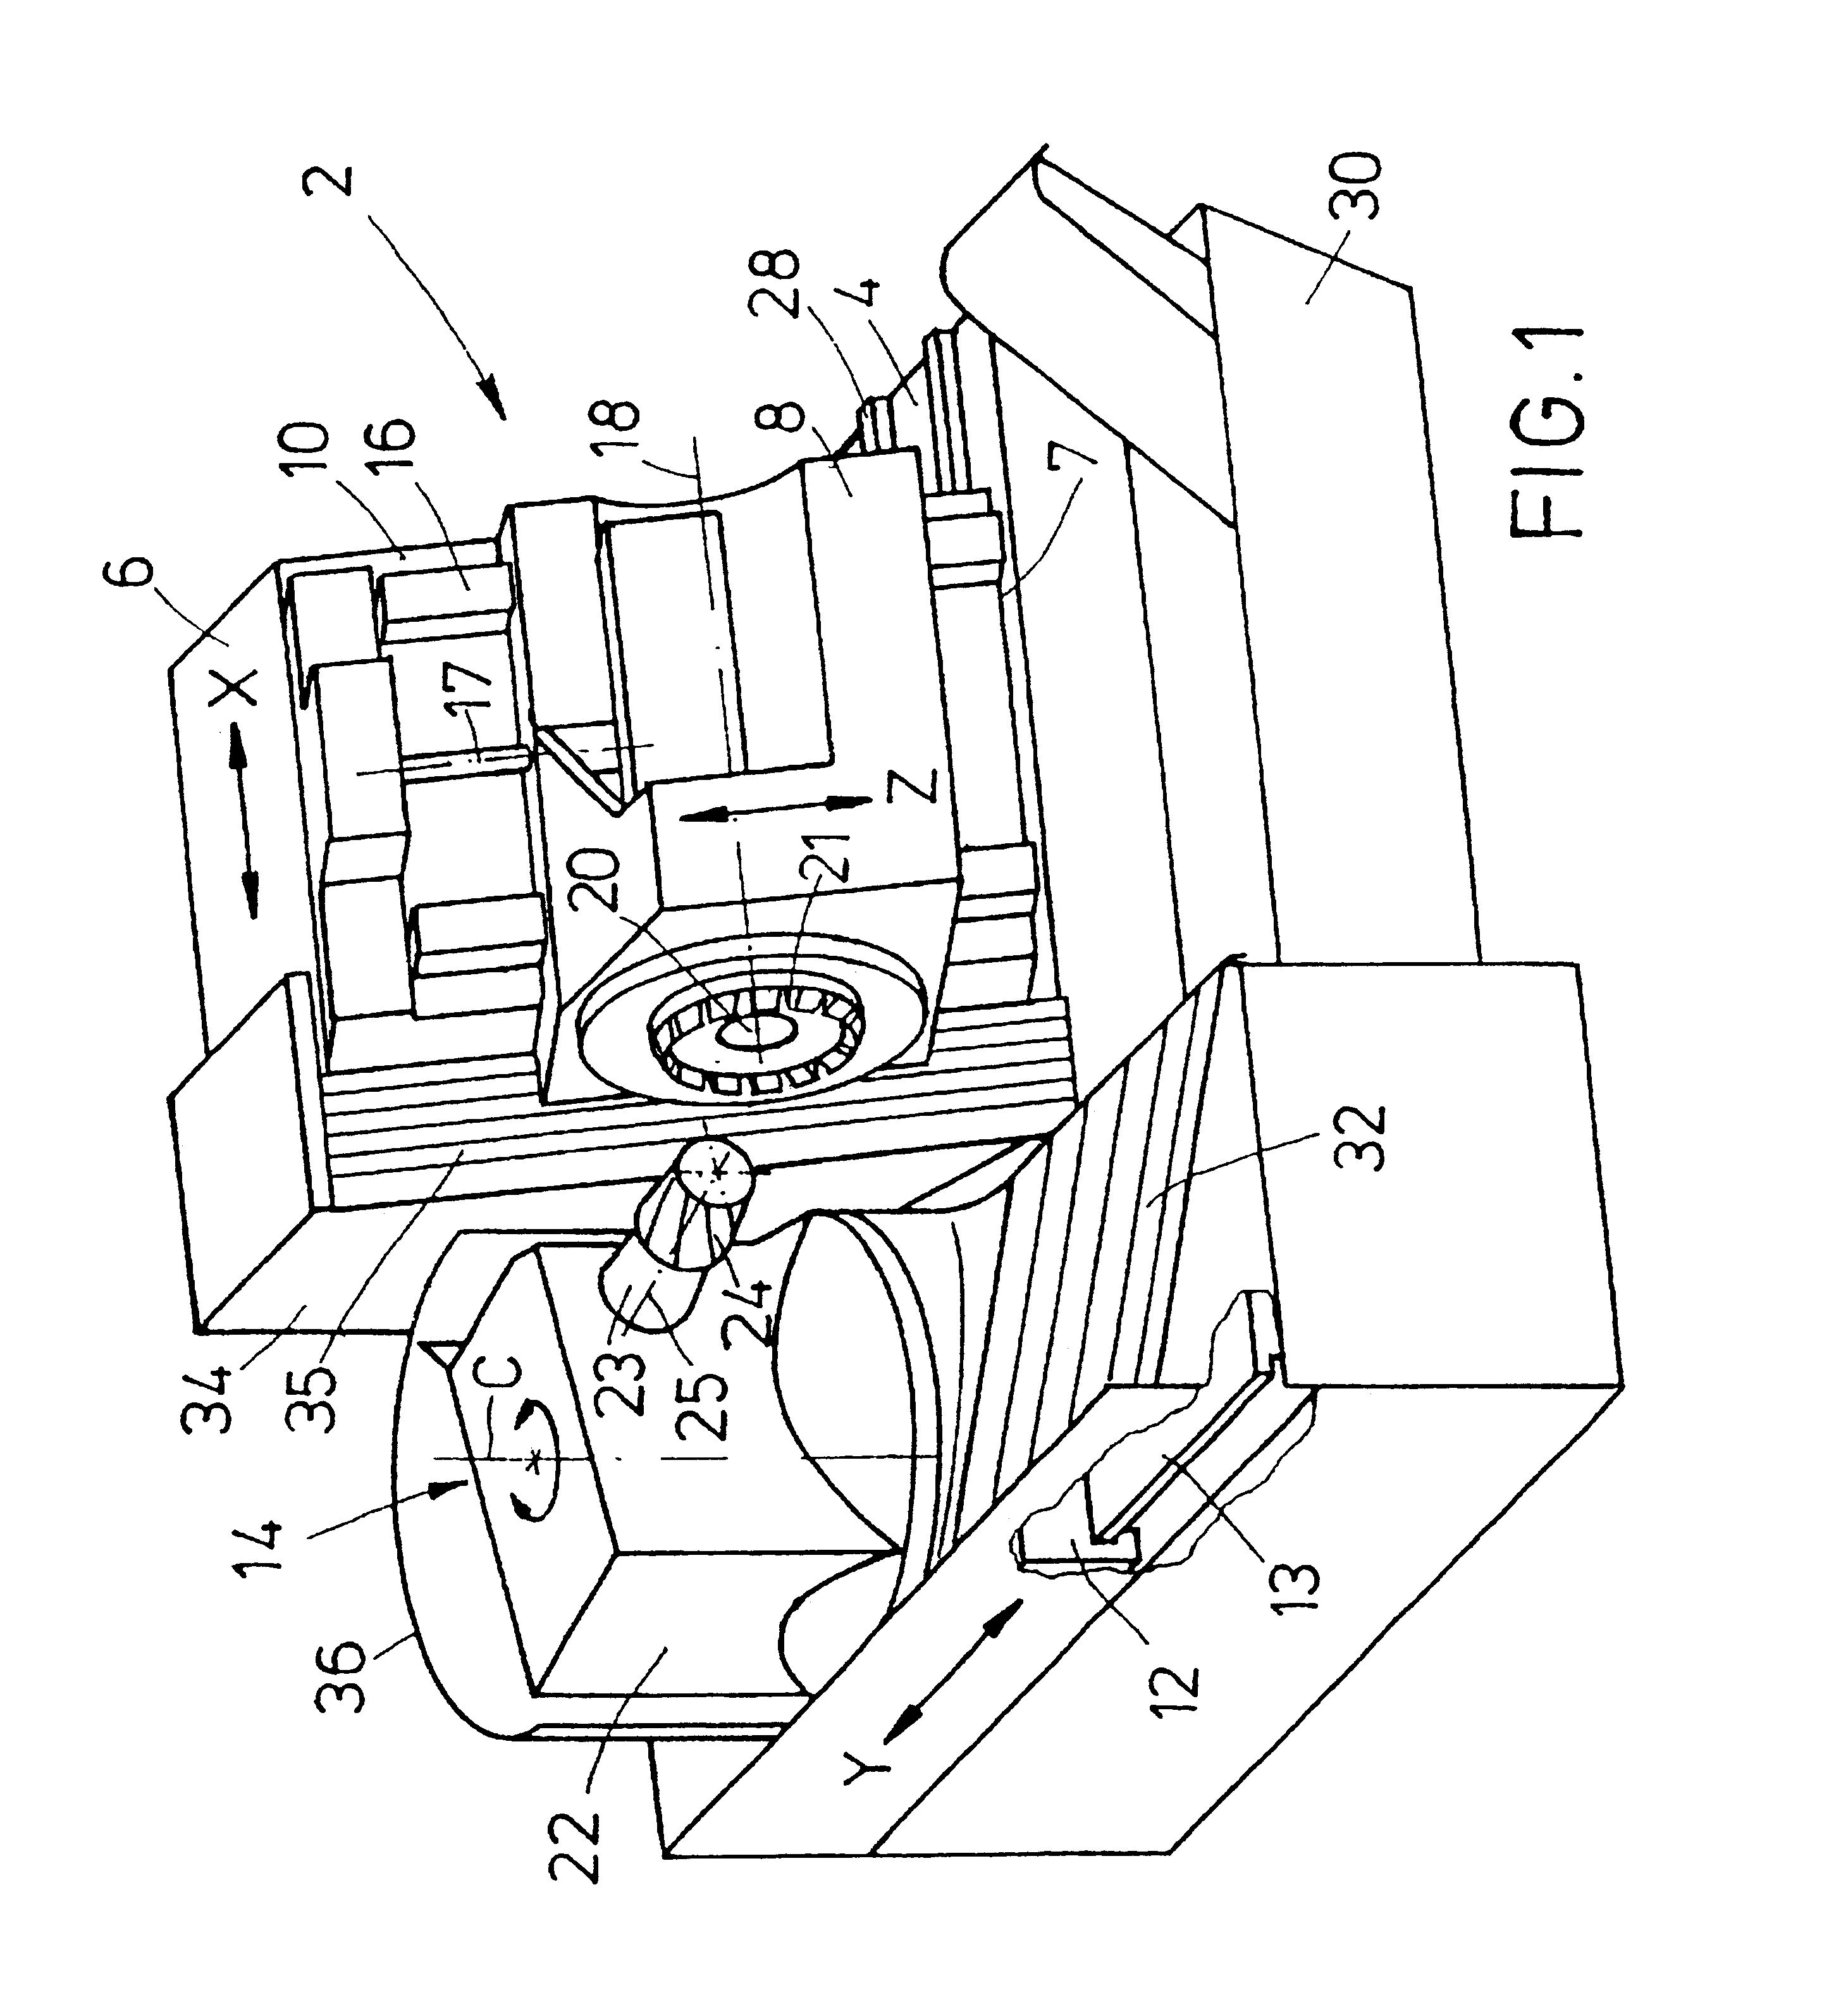 Machine for producing spiral-toothed bevel gears